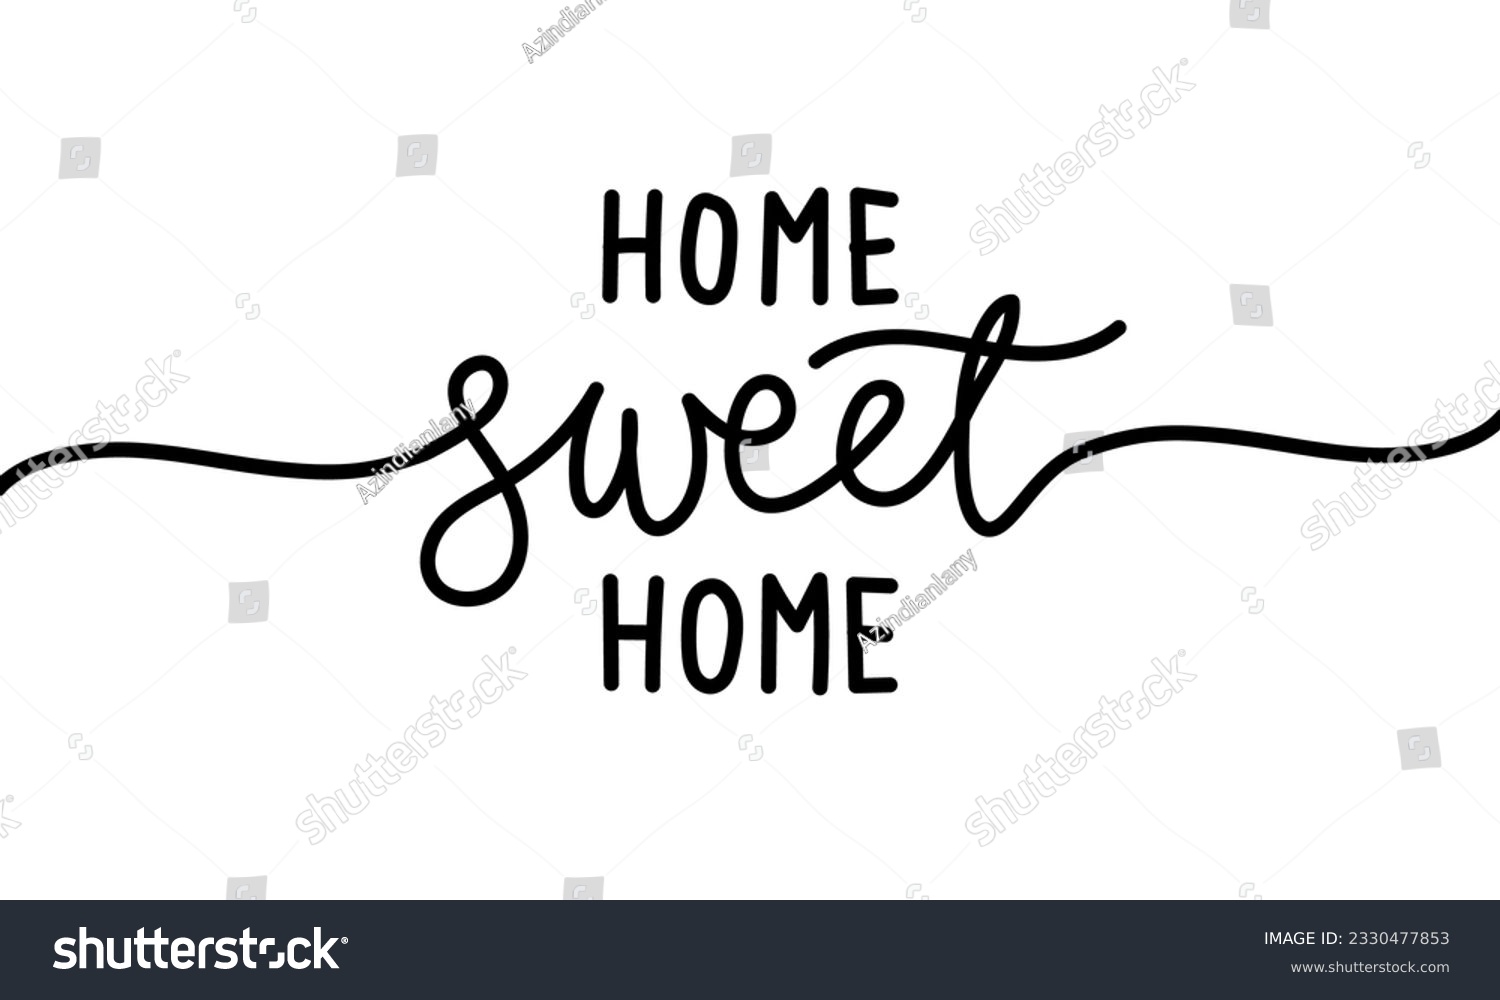 SVG of Home Sweet Home - Typography poster. Handmade lettering print. Vector vintage cursive text with my own handwritten. svg